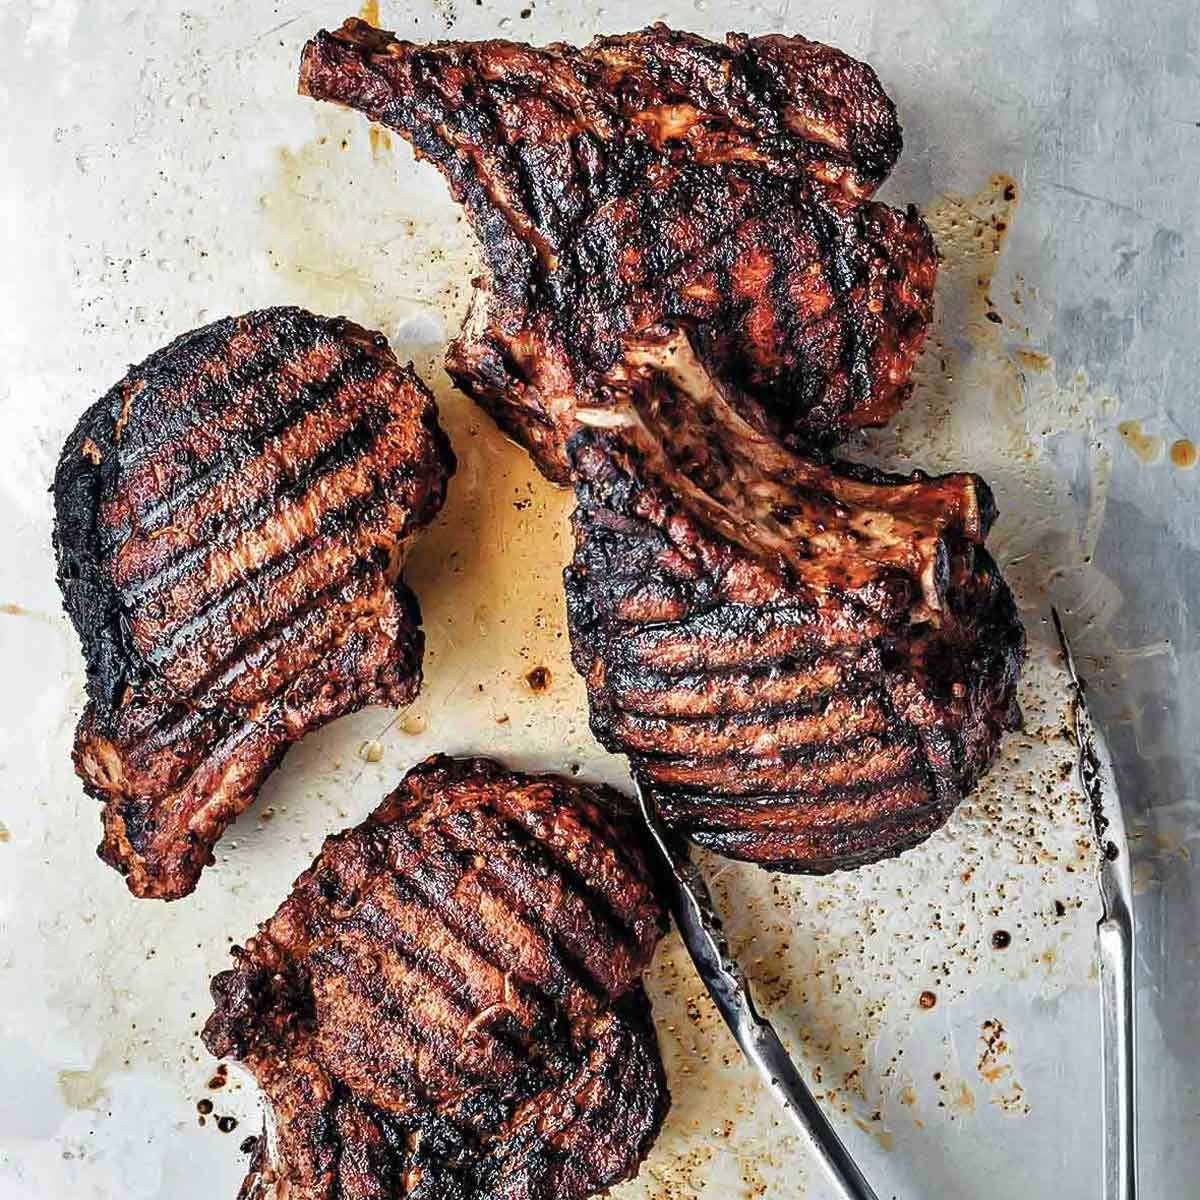 Four spice-rubbed grilled pork chops on a baking sheet with a pair of metal tongs